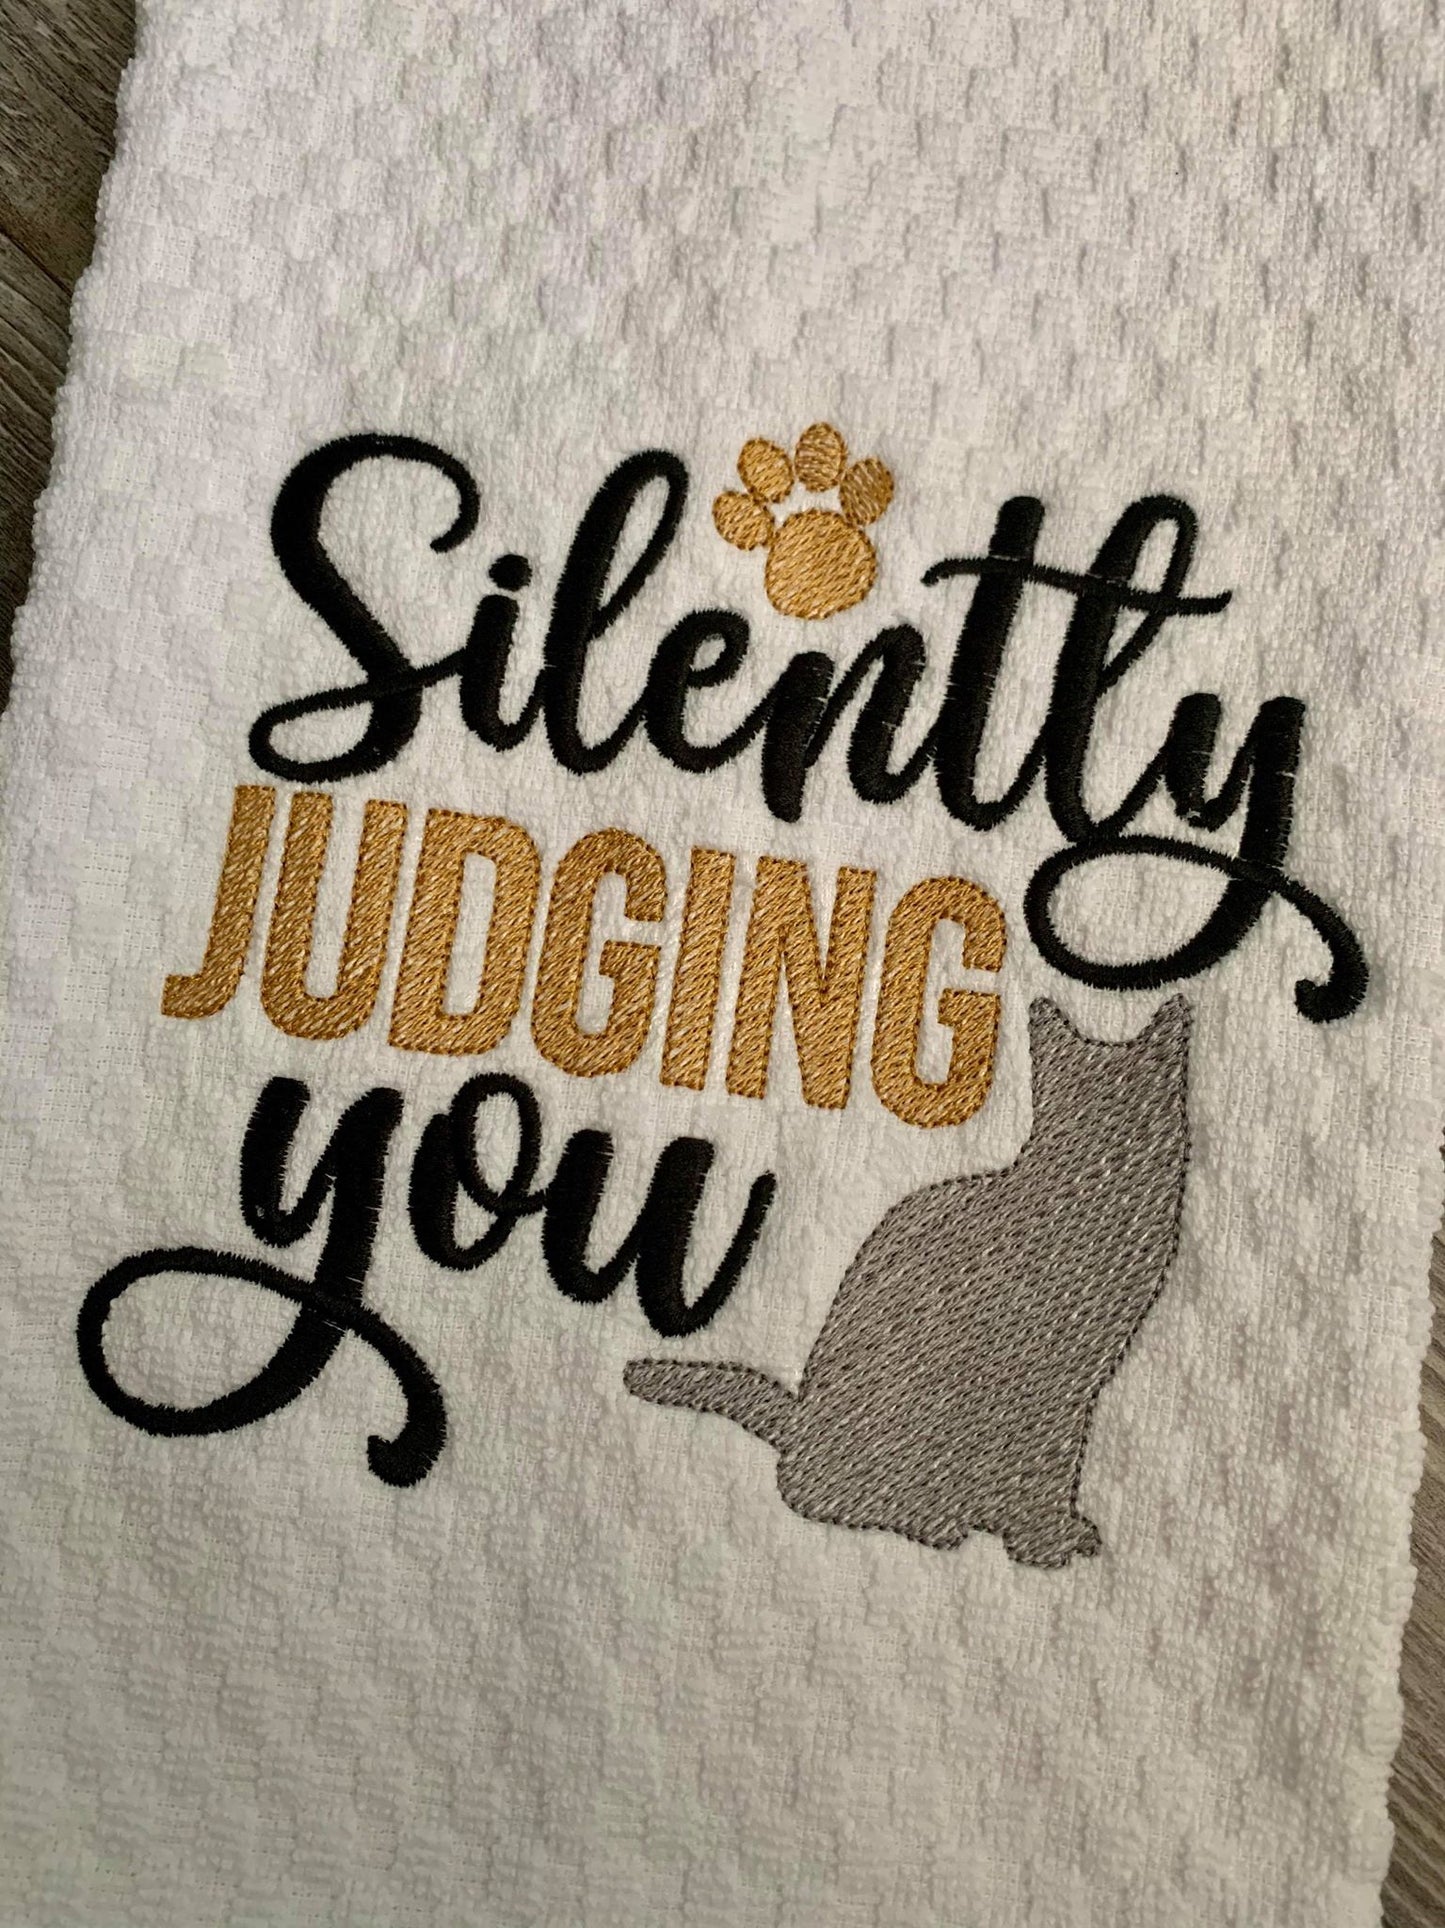 Silently Judging You - 2 Sizes - Digital Embroidery Design